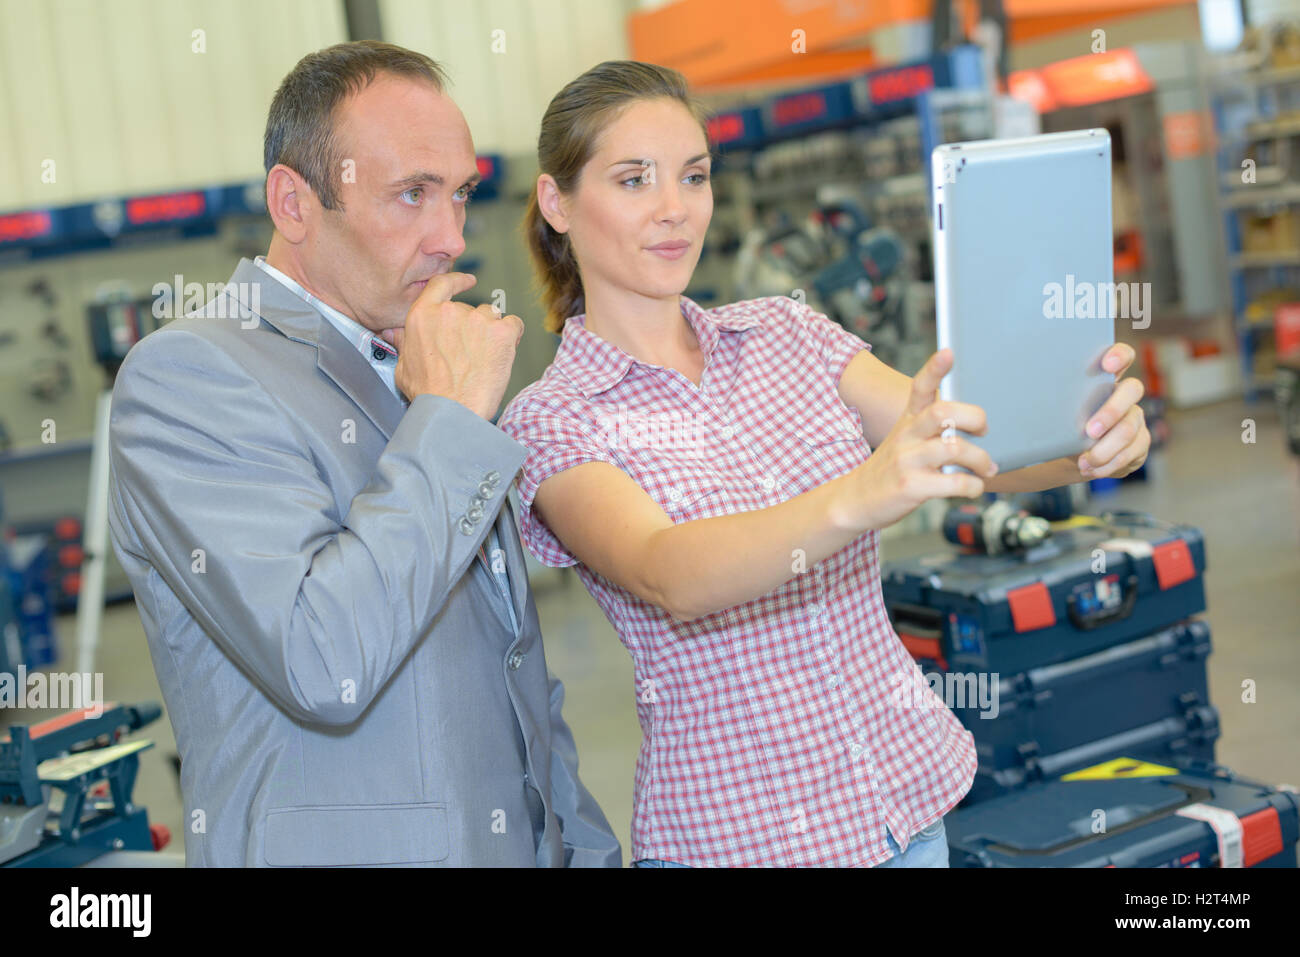 Man and woman in hardware store holding tablet Stock Photo